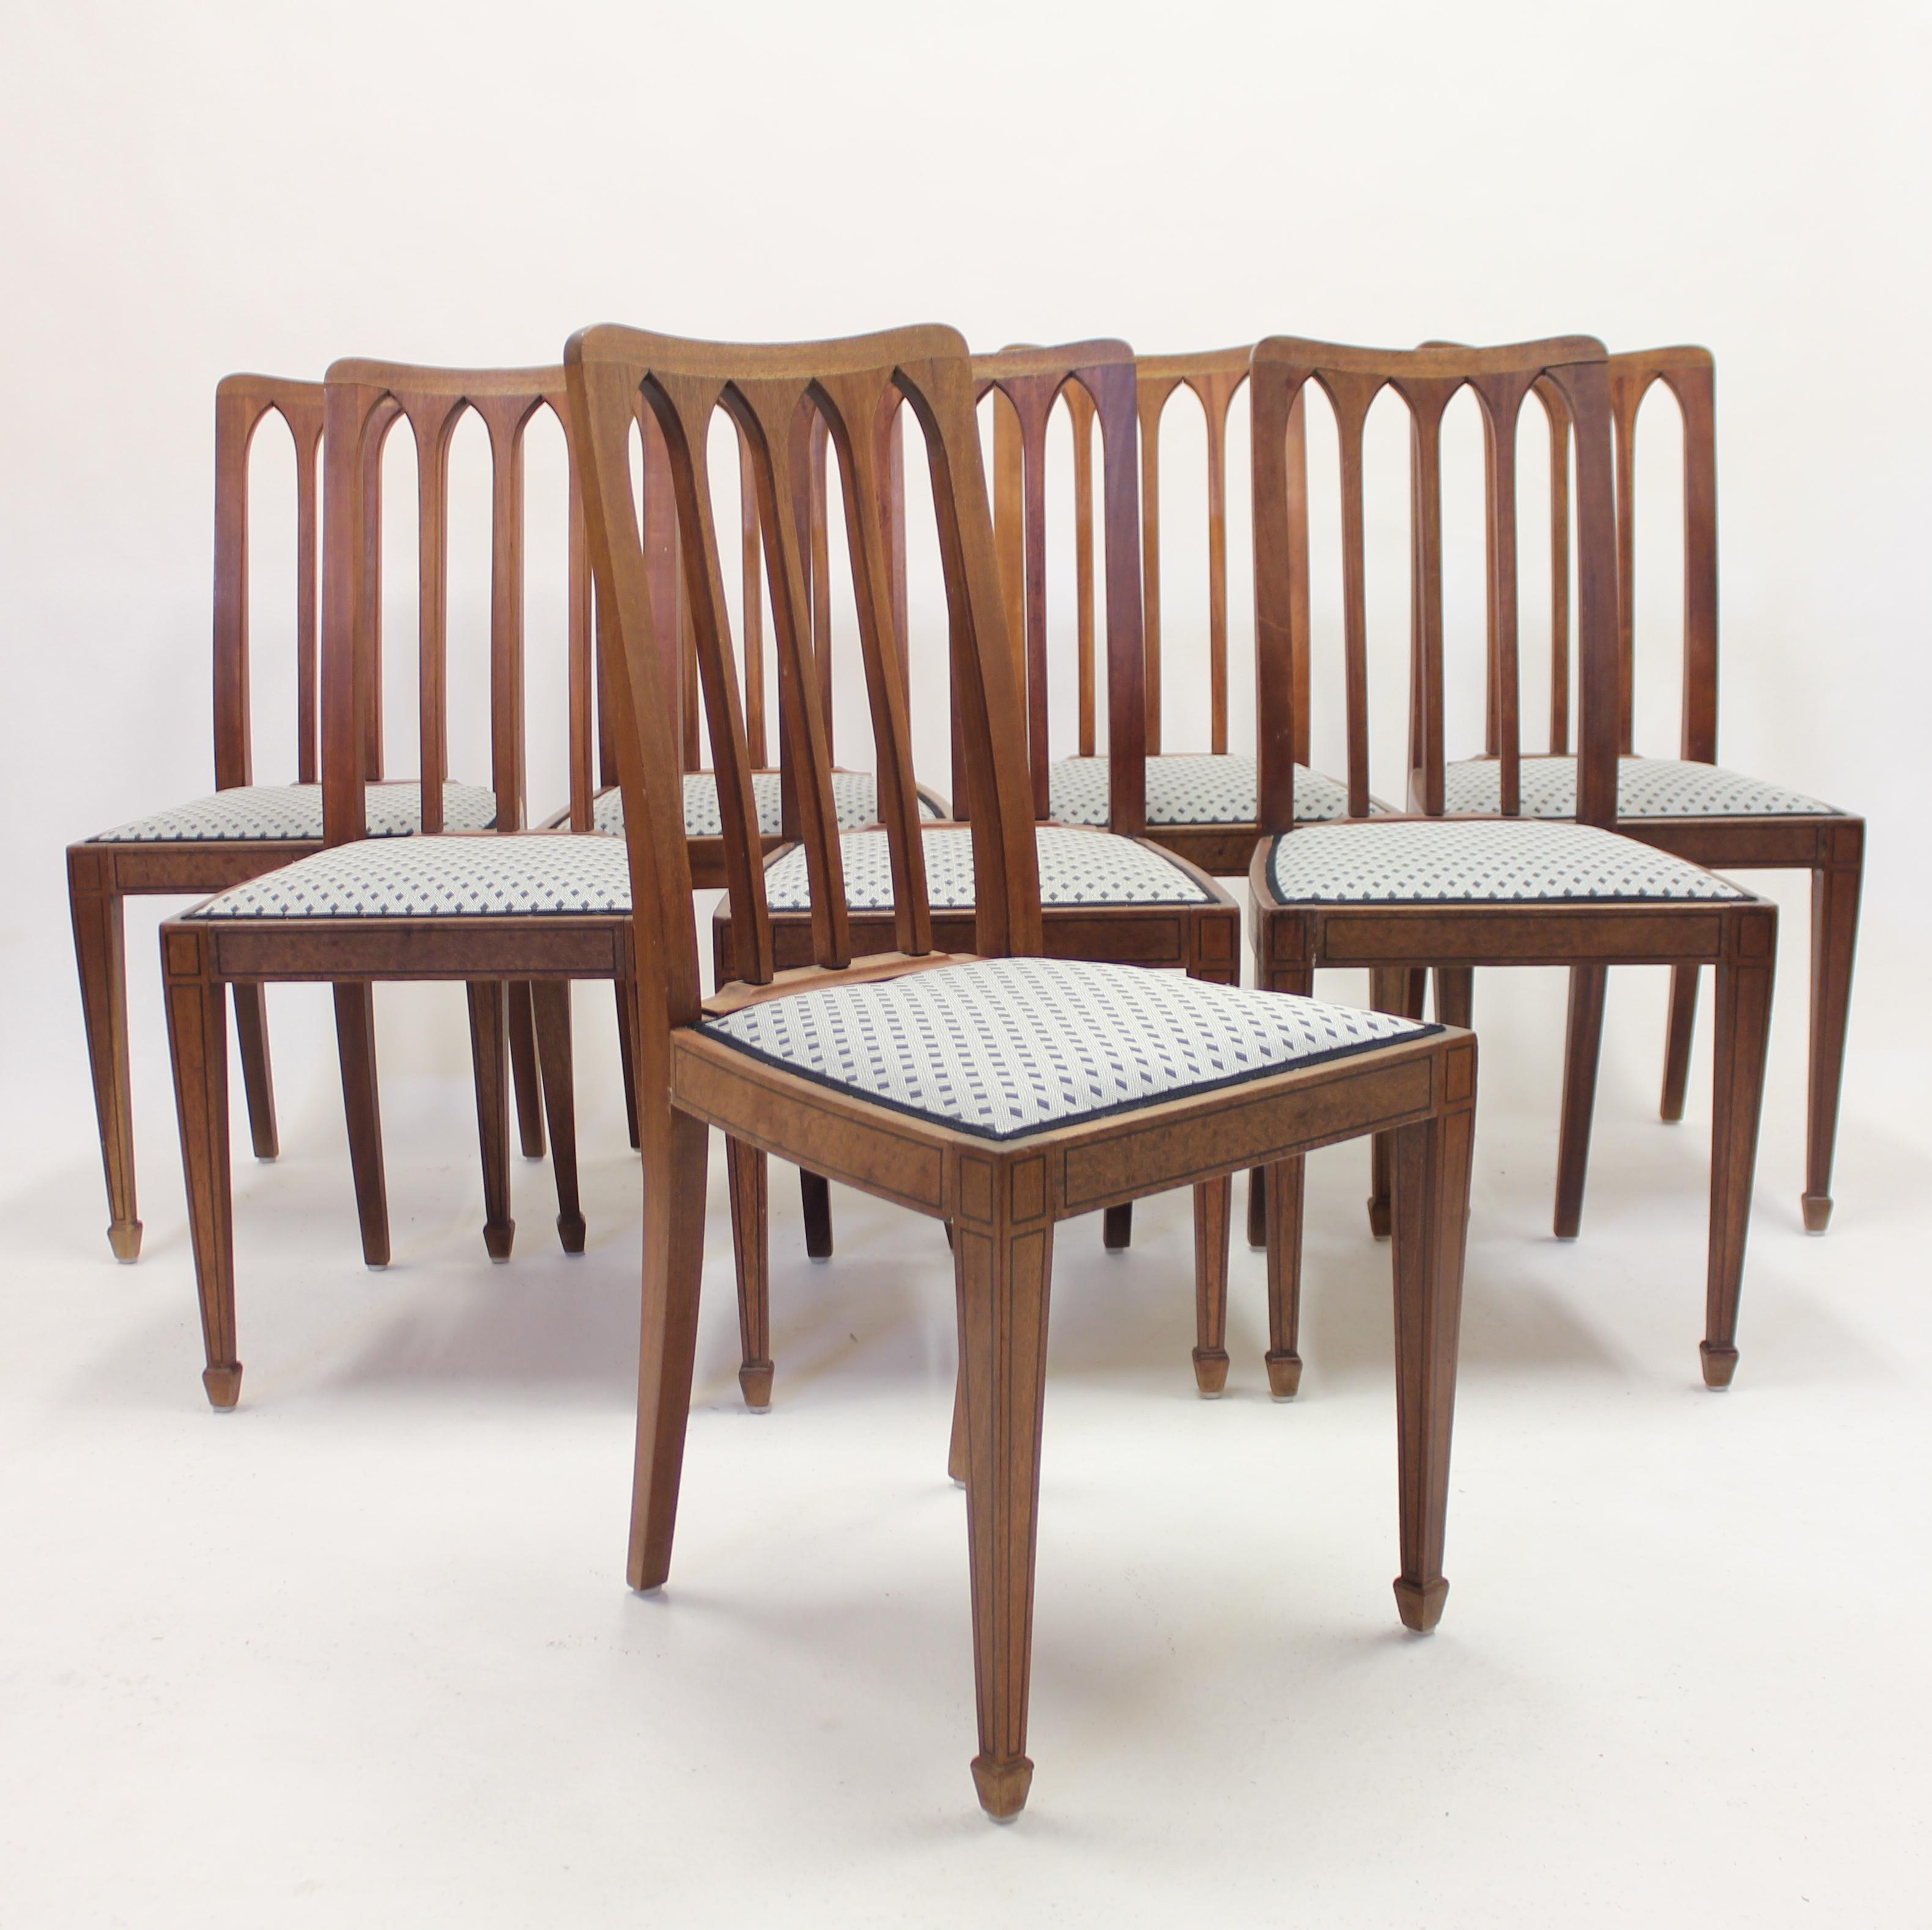 Fabric Set of 8 Oak Architectural Arts & Crafts Chairs, Early 20th Century